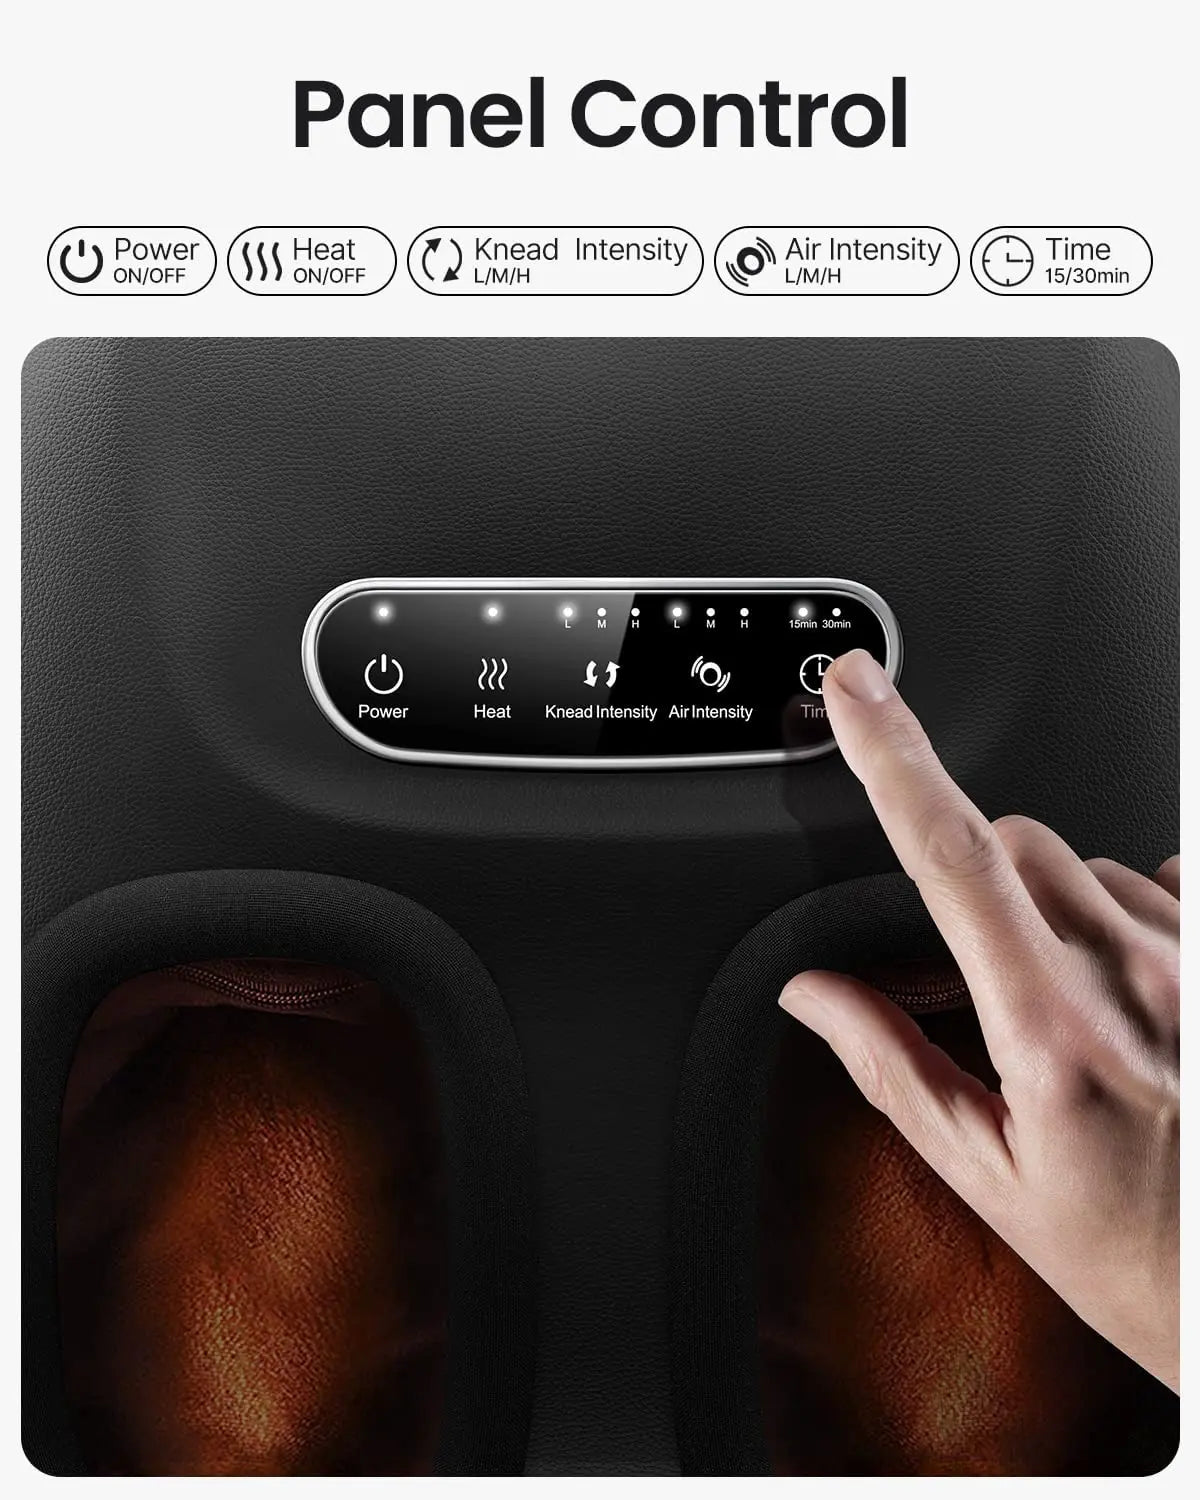 A close-up of a panel control for a Renpho EU Shiatsu Foot Massager Lite, featuring buttons for power, heat, knead intensity, air intensity, and time, with a hand pressing the time button. Icons above each button indicate their function. Text at the top reads "Panel Control," offering customization options for an enhanced massage experience.